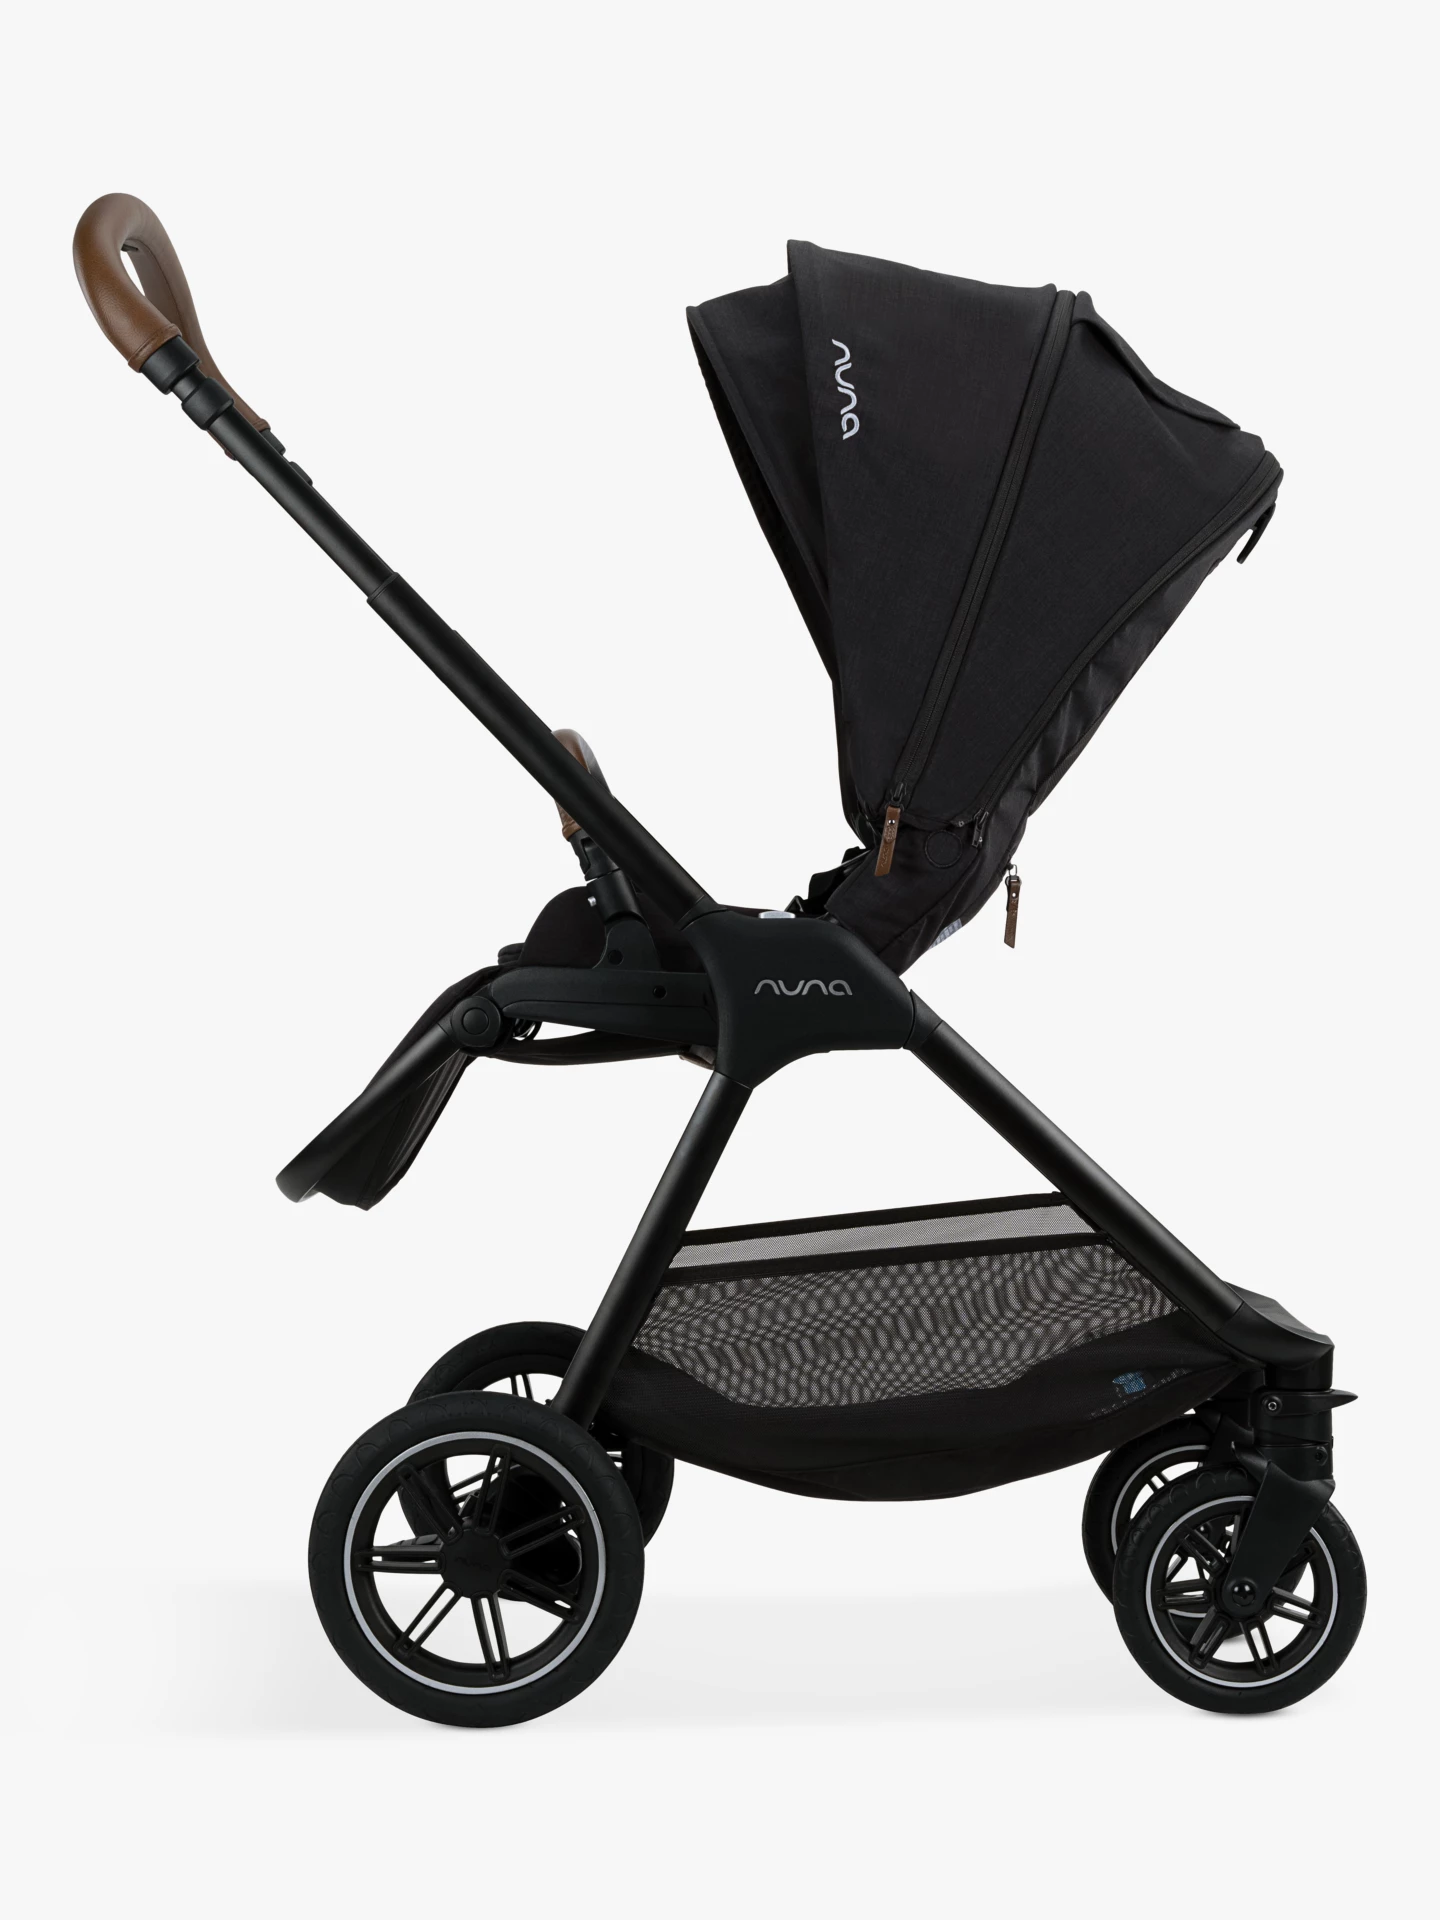 A black stroller with a wooden handle